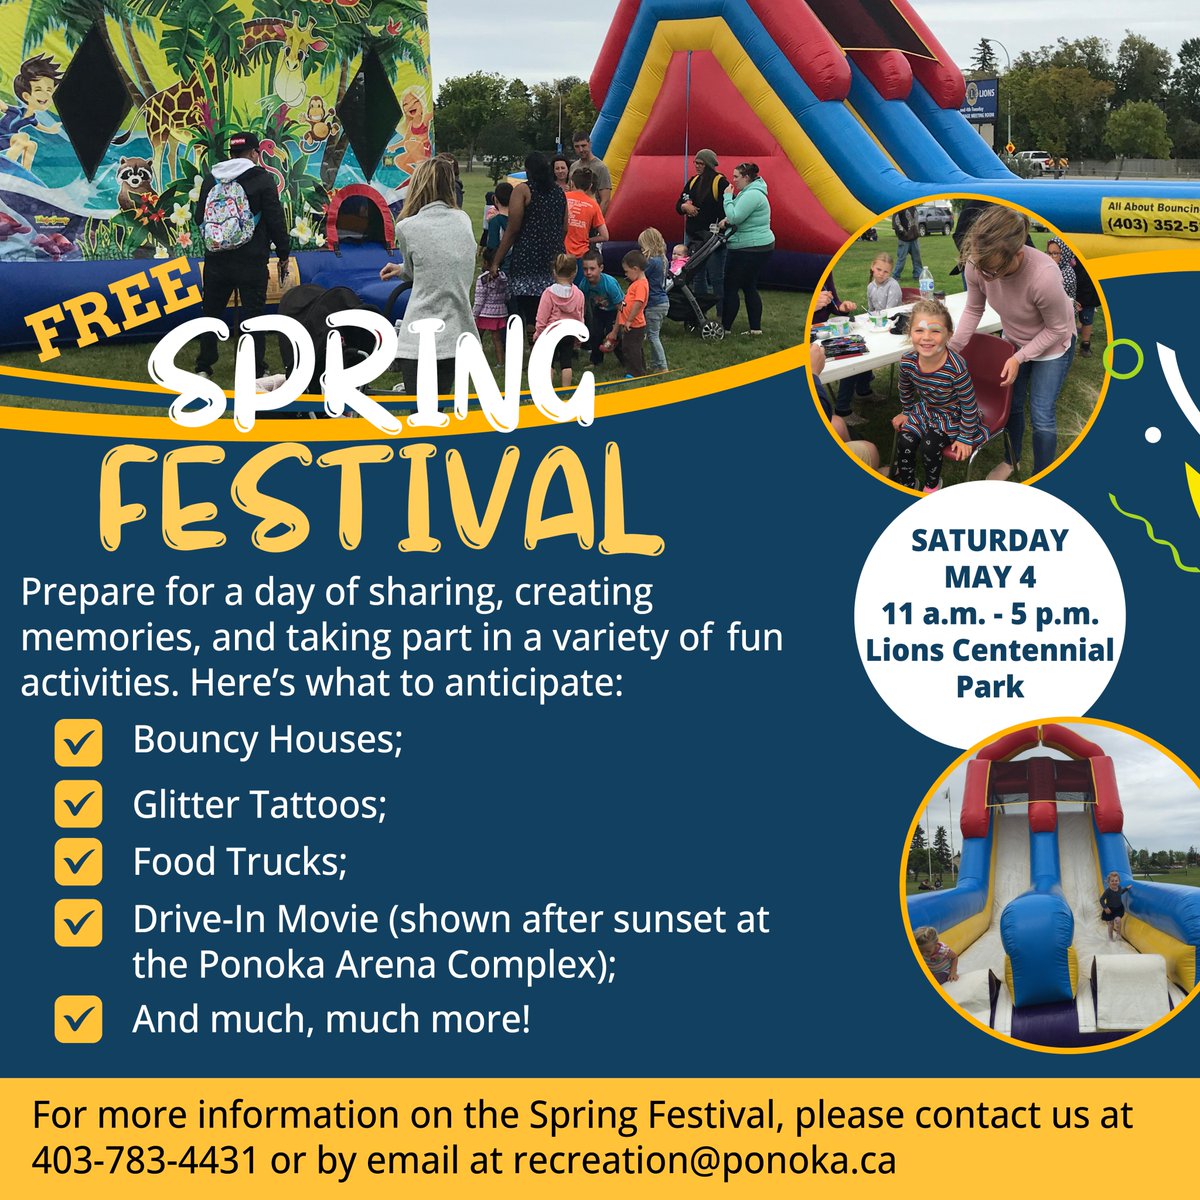 The Town of Ponoka Spring Festival is a free-to-attend event that promises a fun-filled day for the whole family. The new Spring Festival will offer a wide variety of activities and entertainment. Full details: tinyurl.com/yypyhjjk